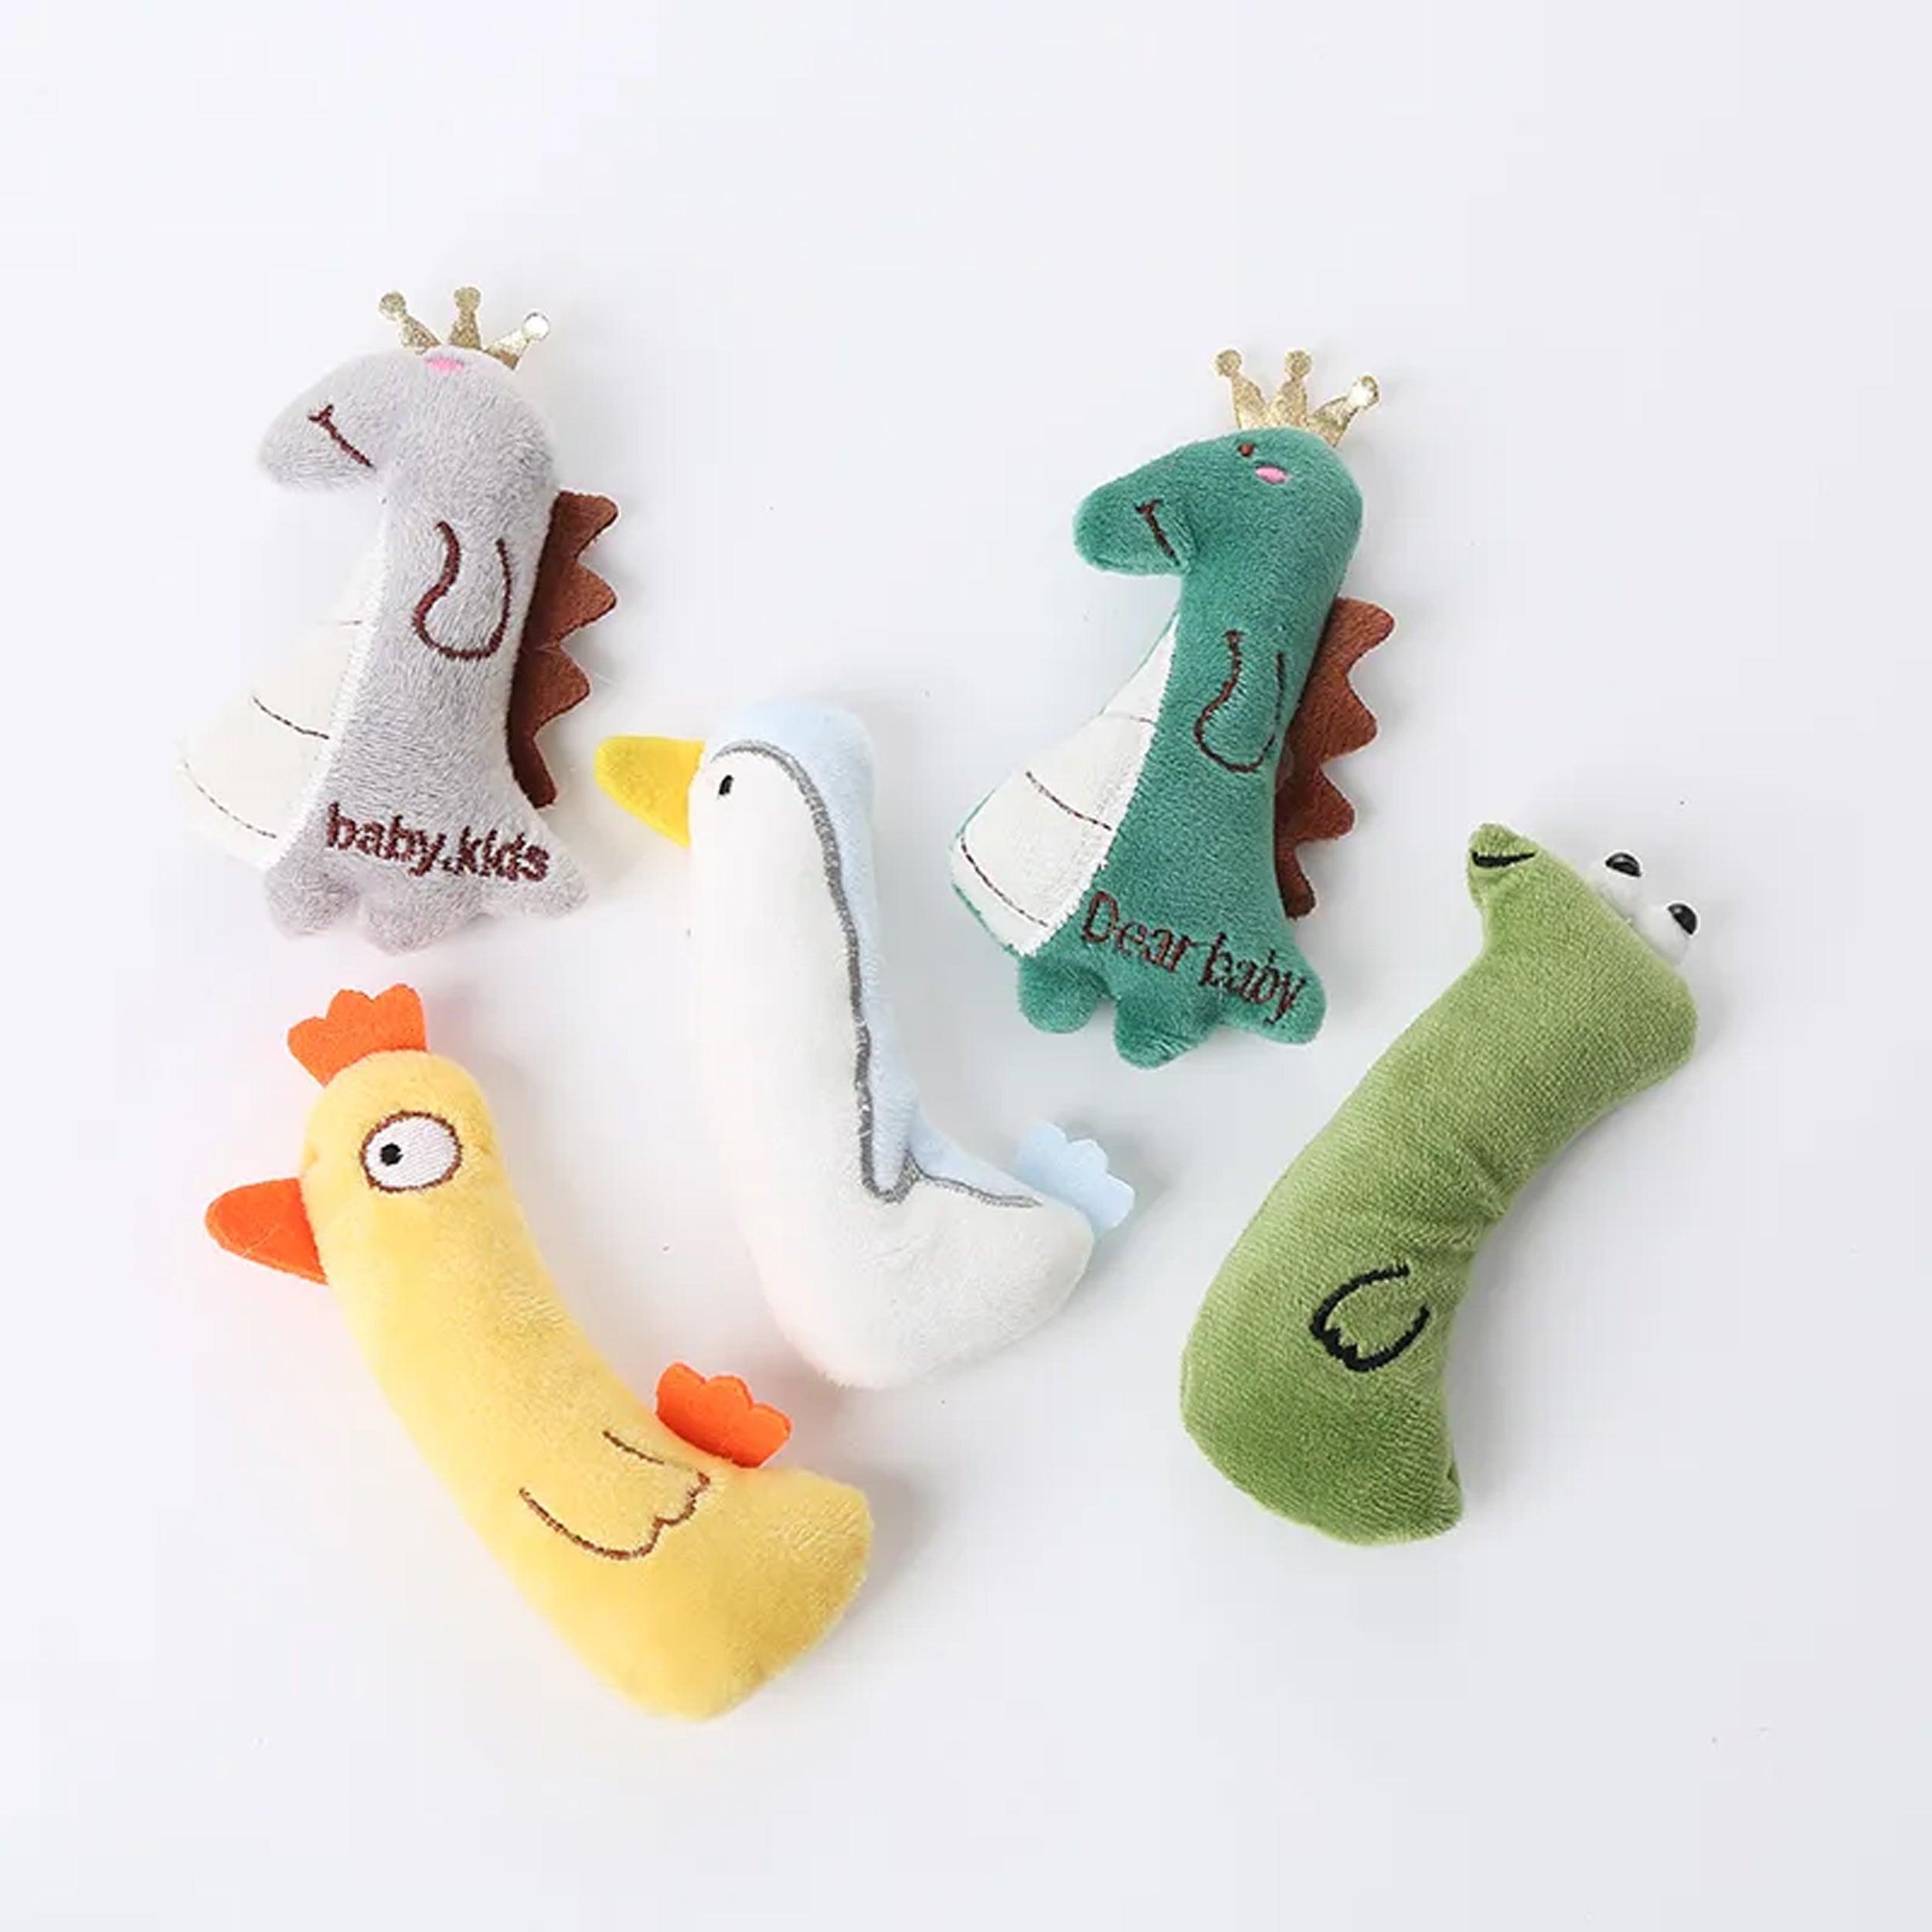 Make Playtime Fun with Our Animal Shaped Plush Catnip Cat Toy - Perfect for Your Feline Friend